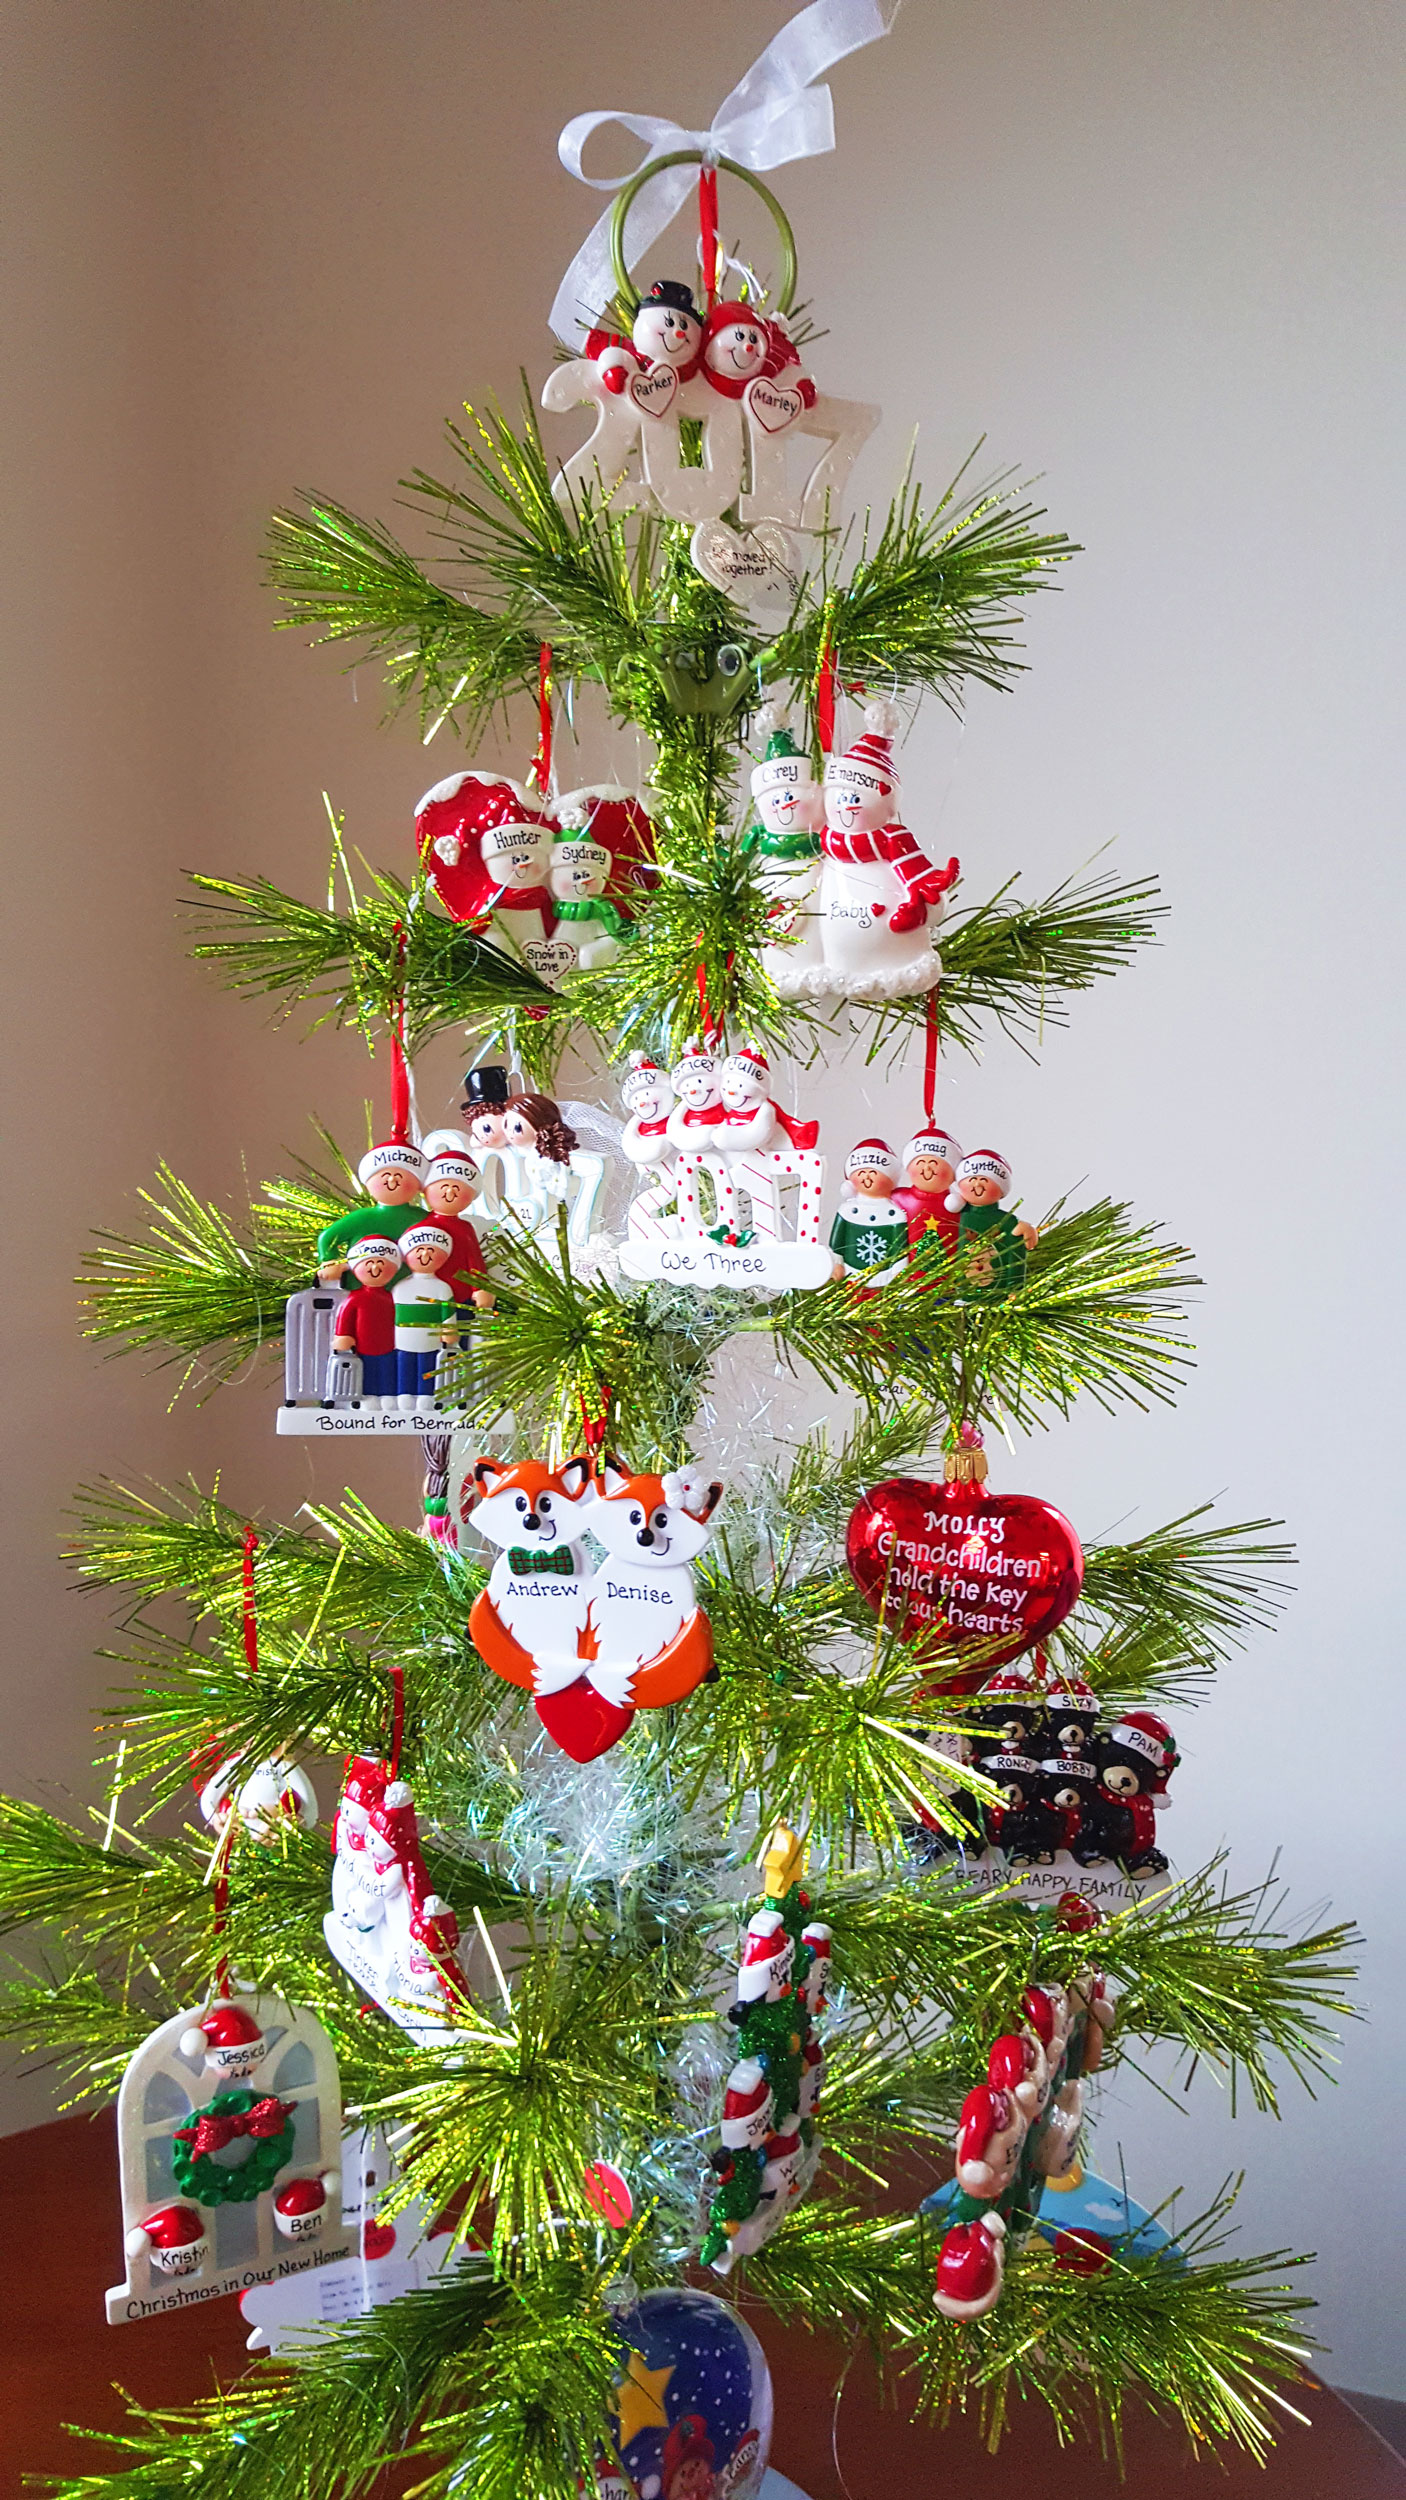 A collection of Personalized Family Ornaments for you to find the perfect ornament to represent your family this Christmas. | OrnamentShop.com